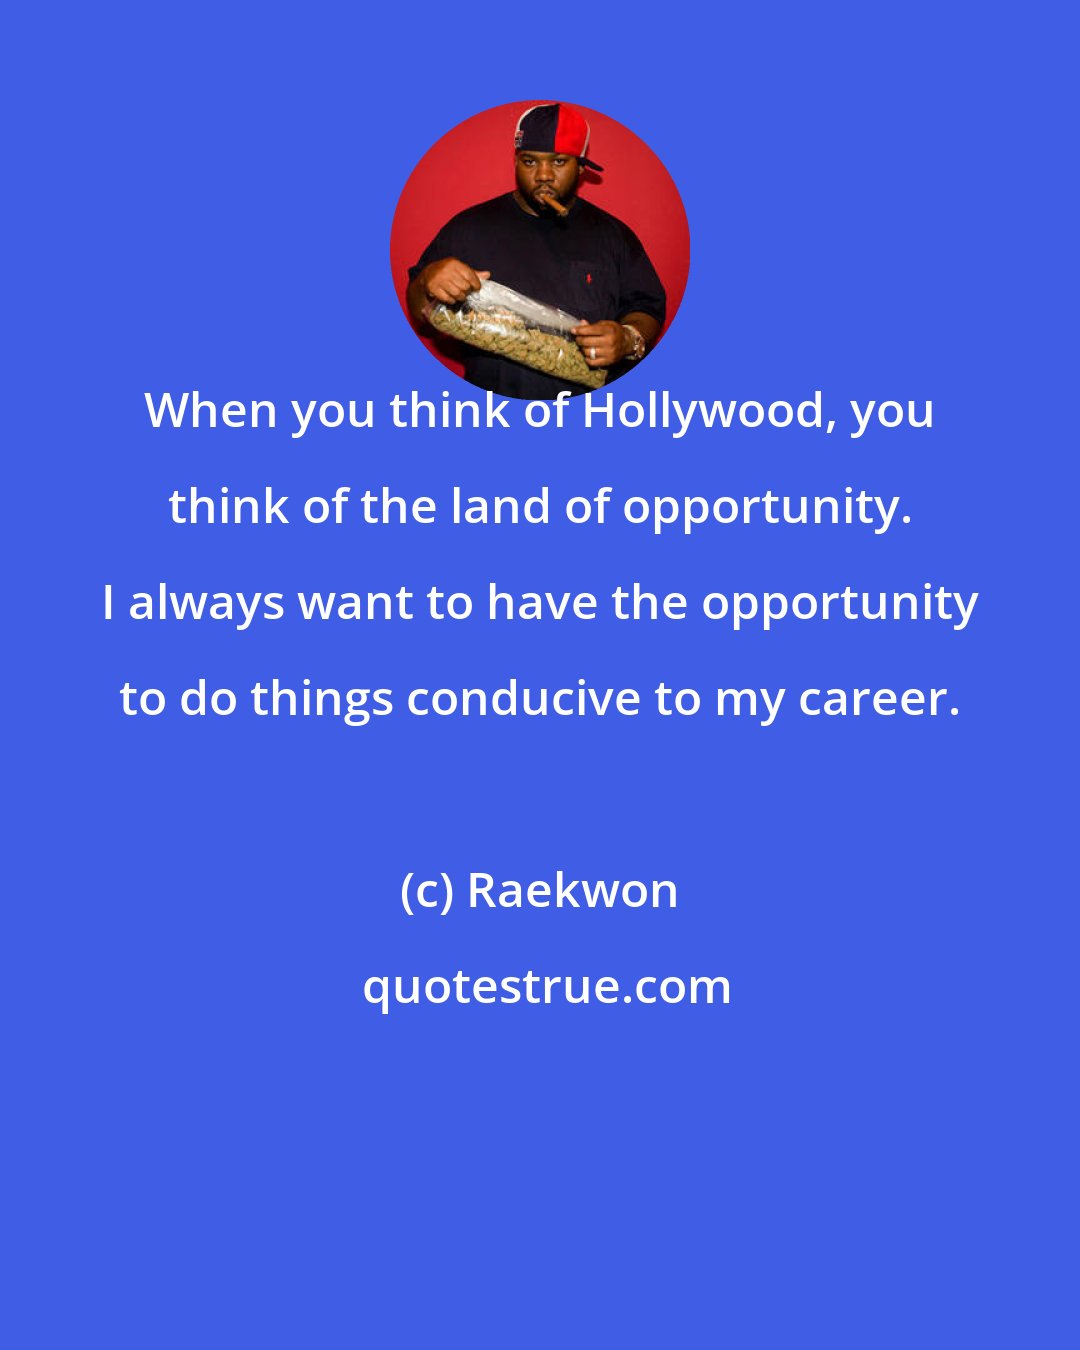 Raekwon: When you think of Hollywood, you think of the land of opportunity. I always want to have the opportunity to do things conducive to my career.